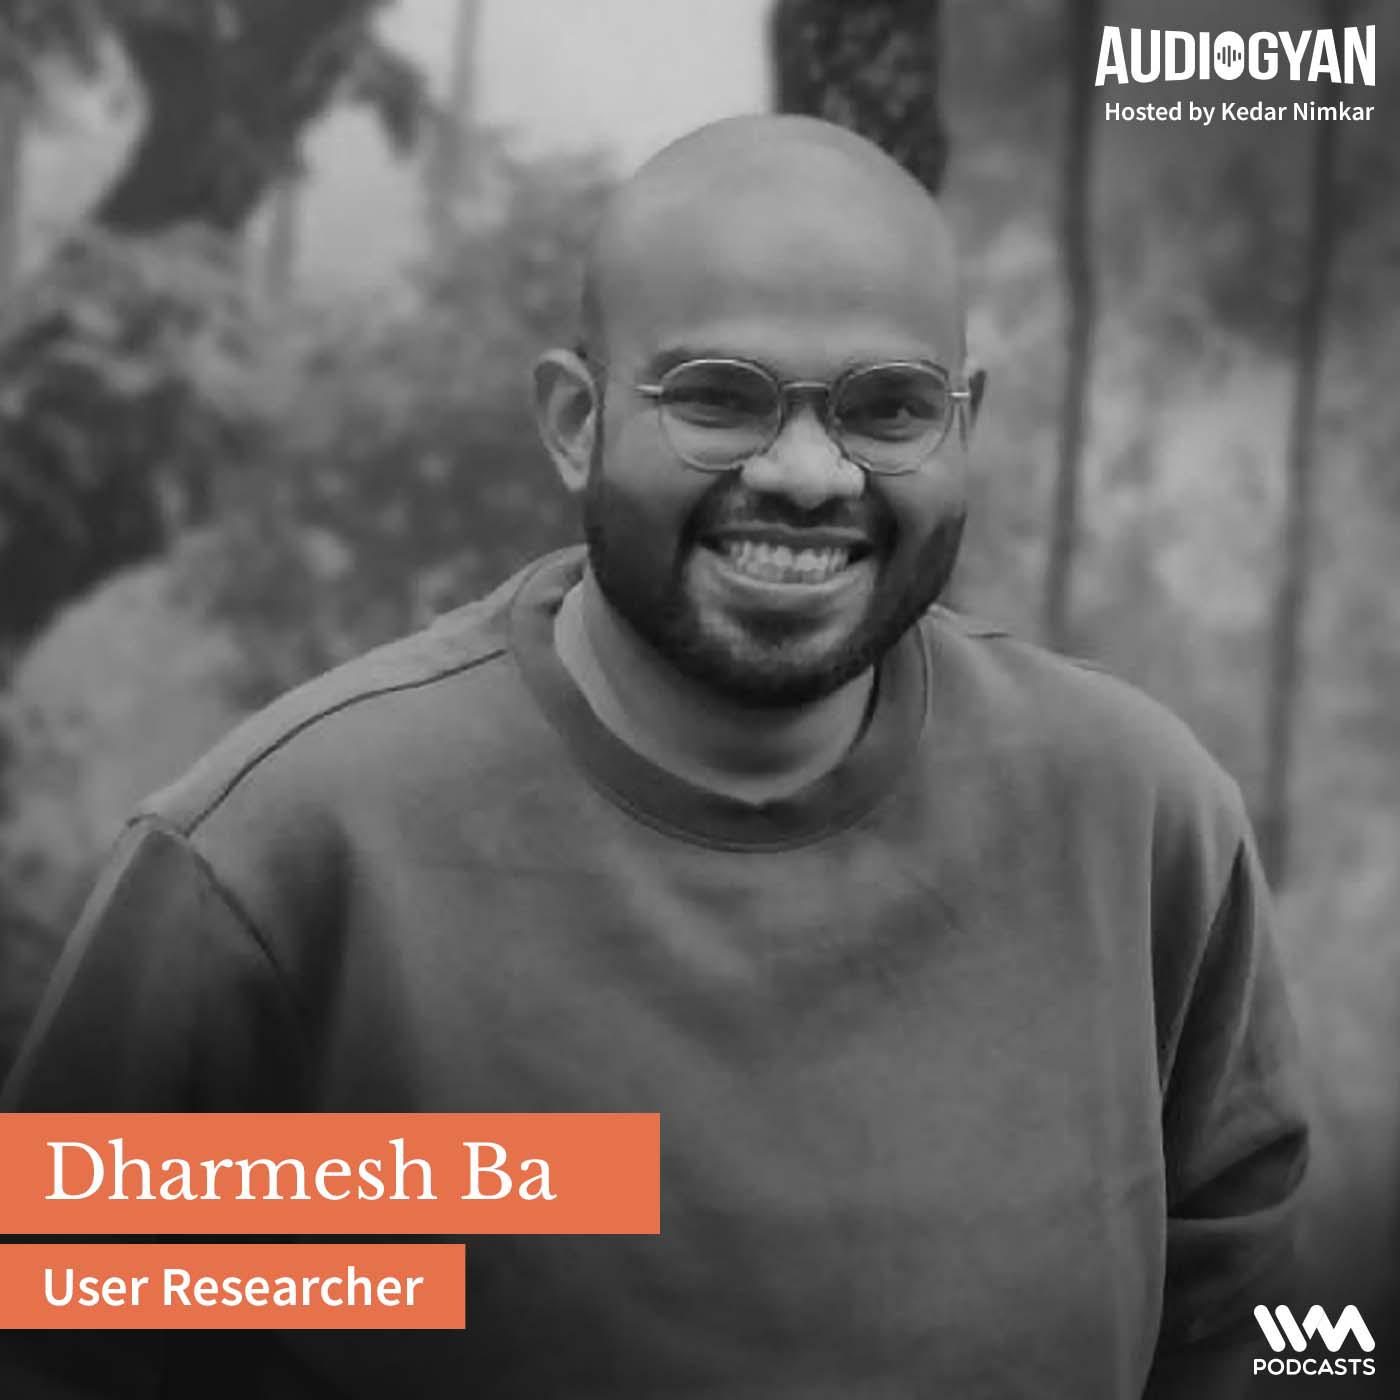 Designing Bottoms Up for India with Dharmesh Ba